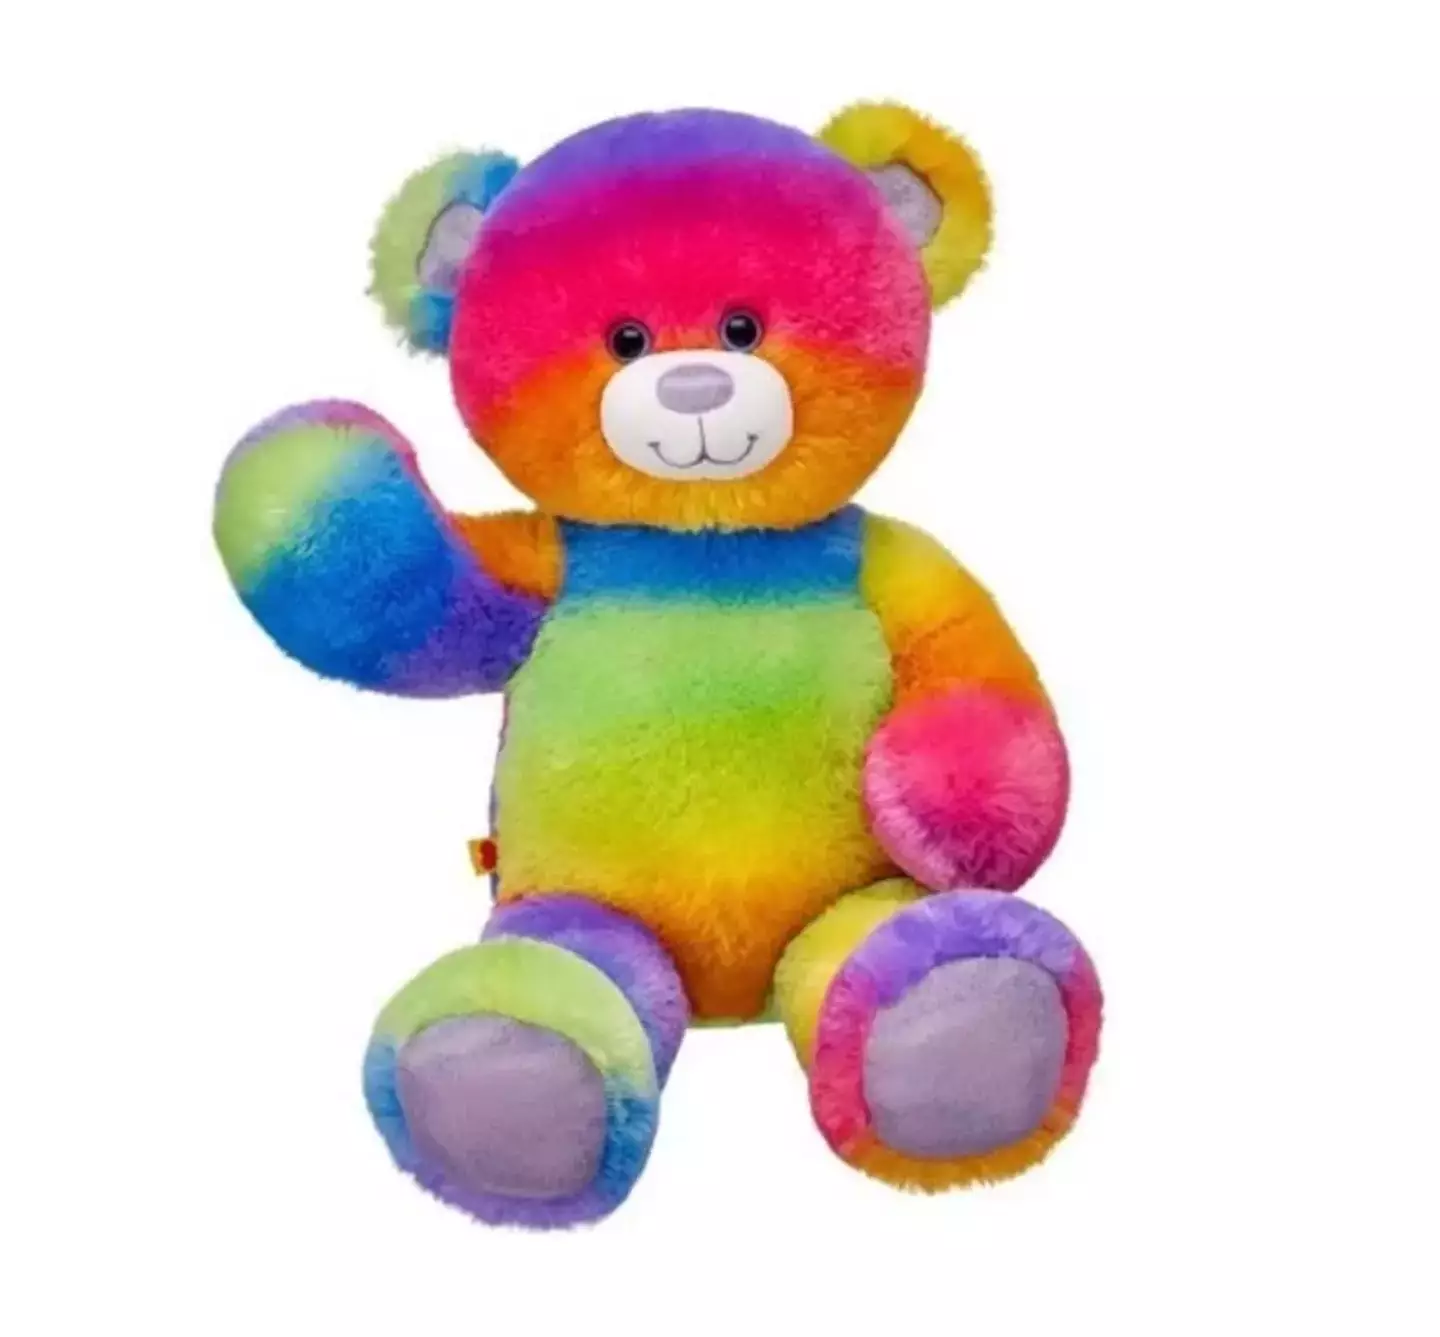 The little girl's beloved bear containing a recording of her late mum's heartbeat looked like this.